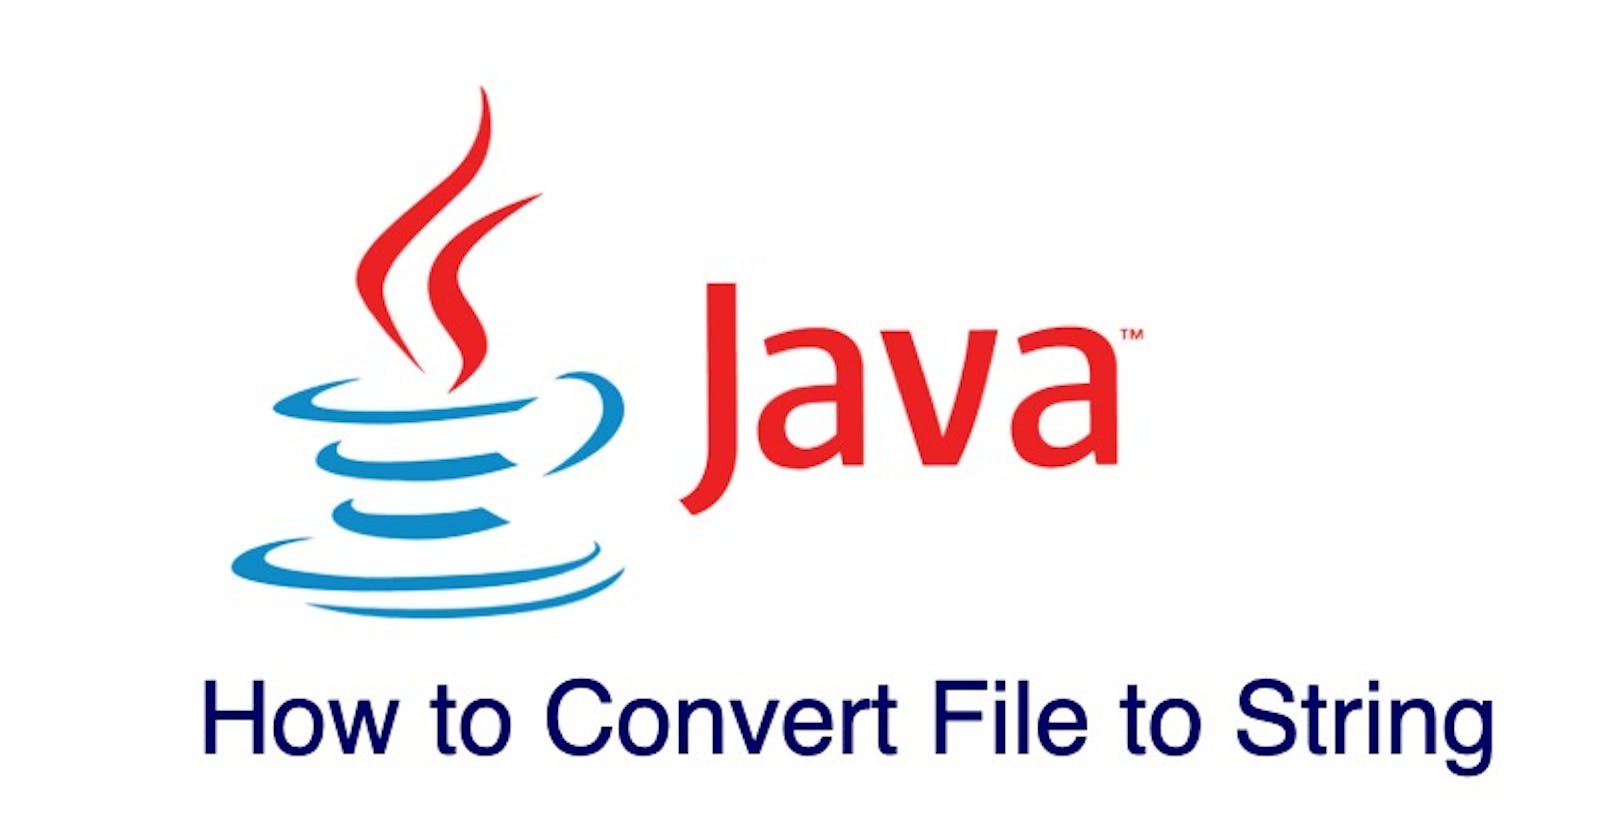 5 simple ways to convert file to a string in java + bonus tech tip